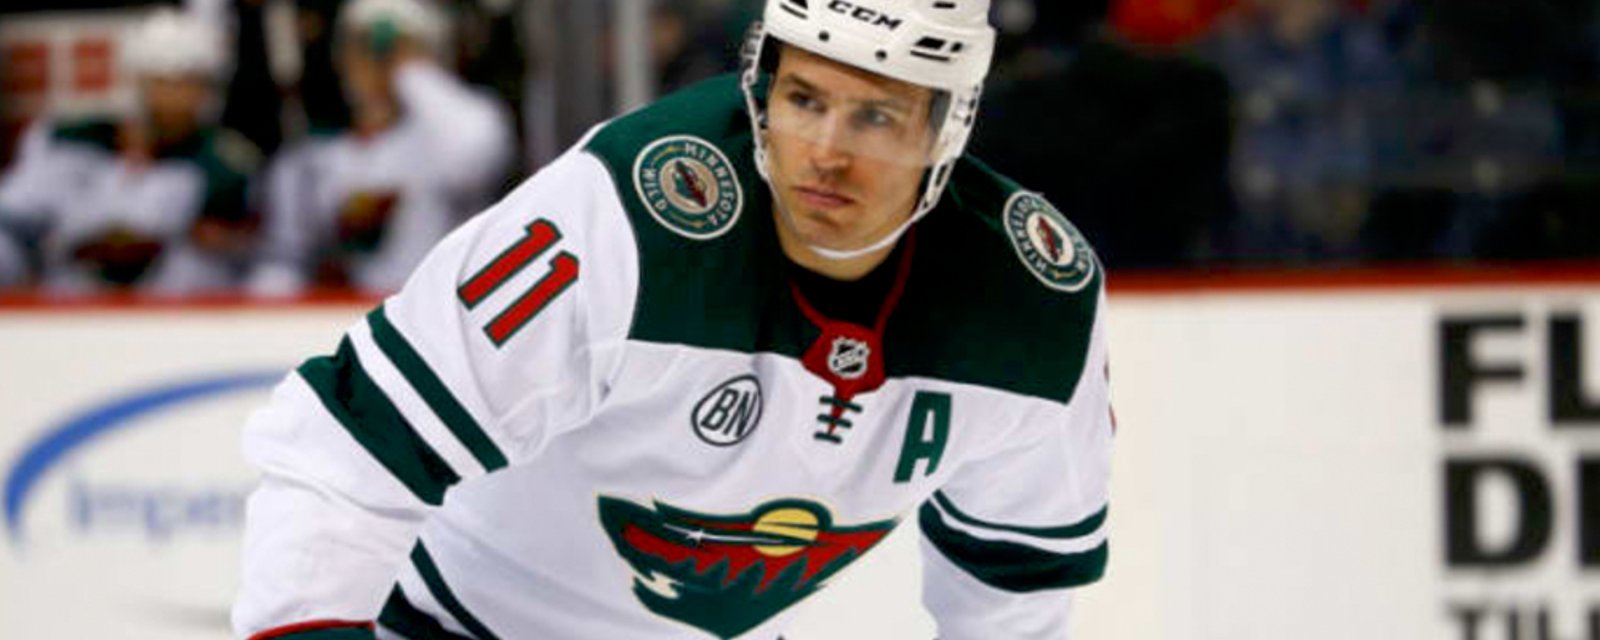 Zach Parise confirms report that he's joining forces again with Lou Lamoriello